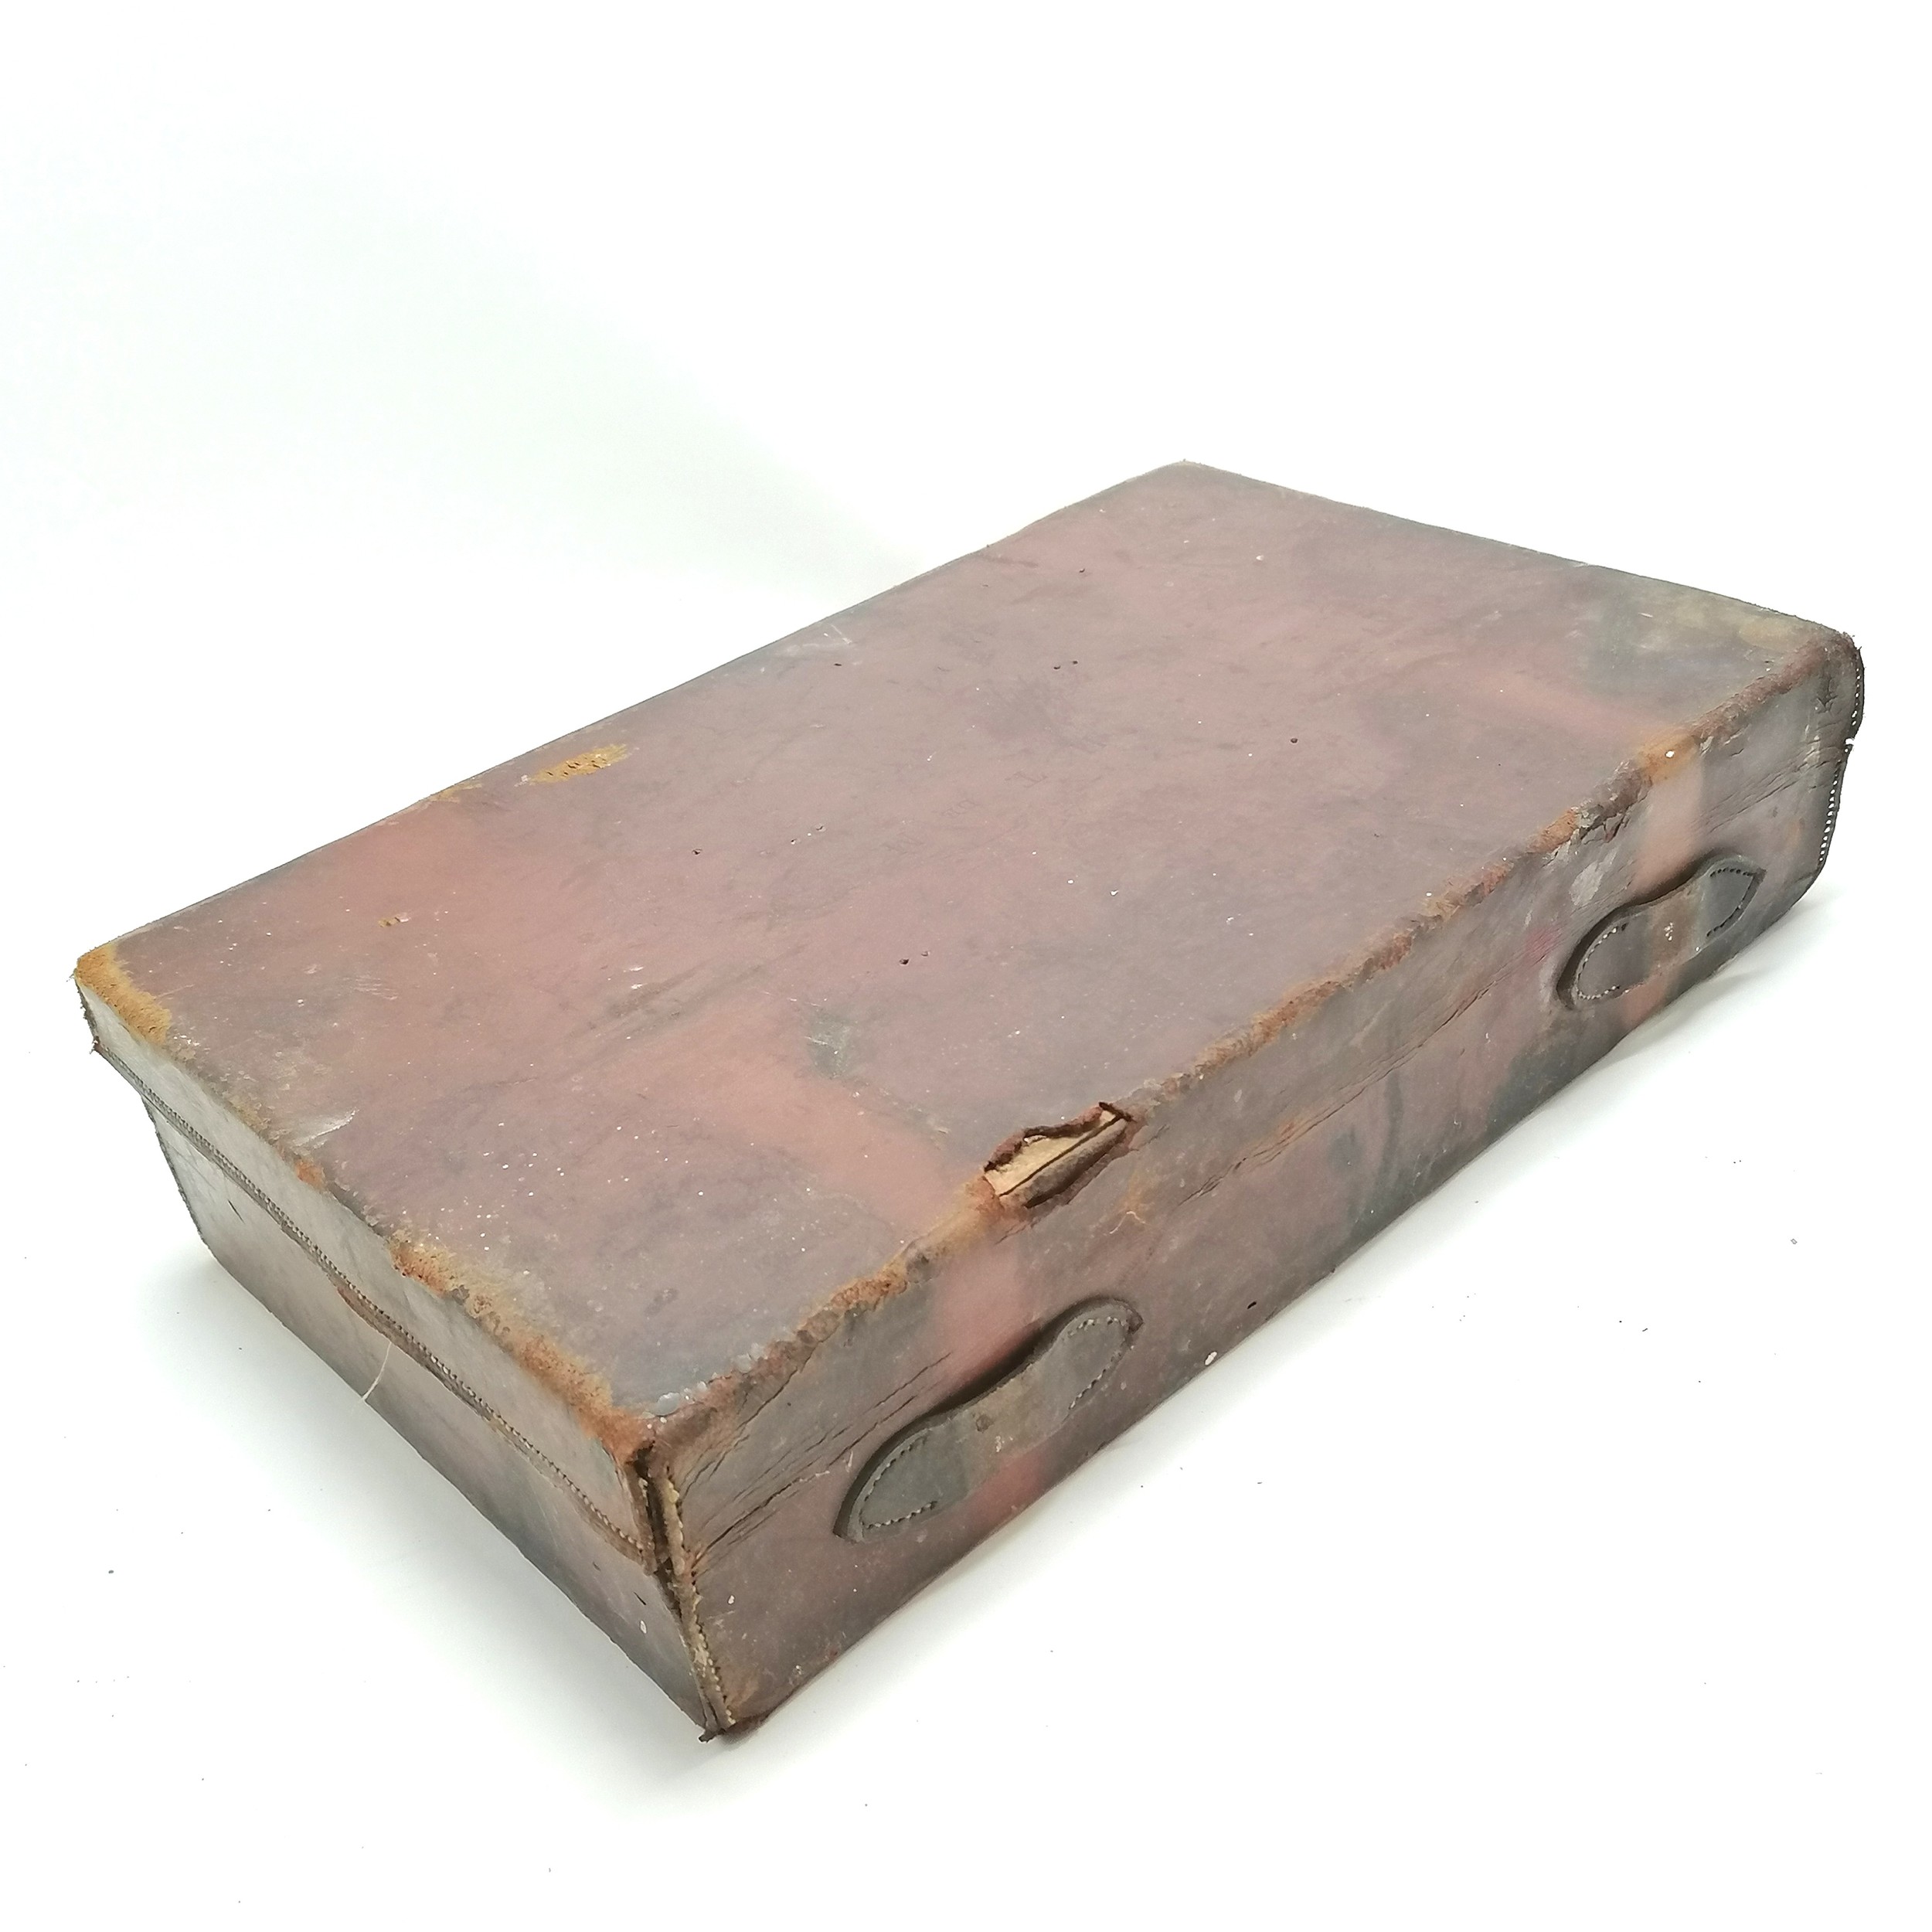 Antique leather covered cartridge case with Belgian label to interior - 41cm x 35cm x 10cm high t/ - Image 3 of 6